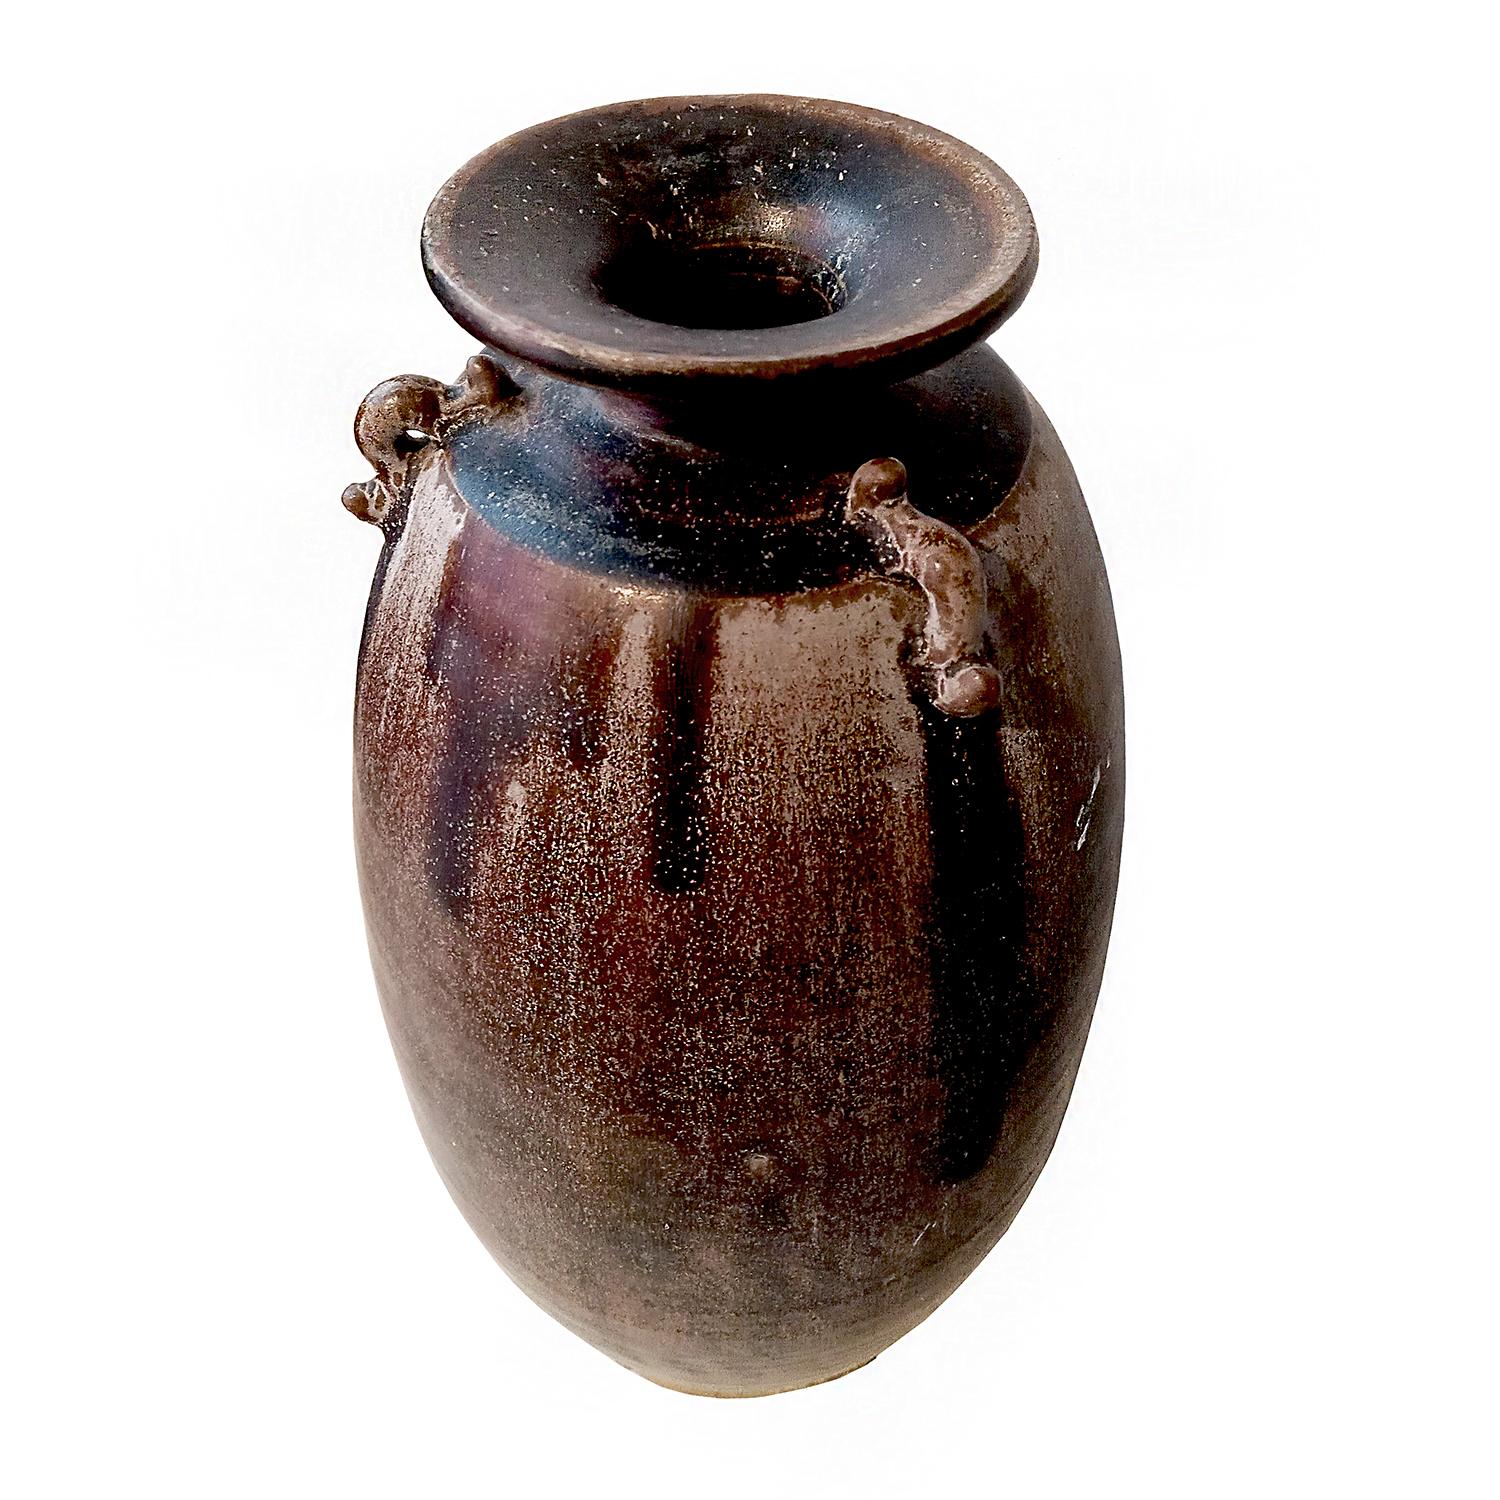 Tall Ceramic Thai Vase in Brown Mottled Glaze, with Looped Handles In Good Condition For Sale In New York, NY